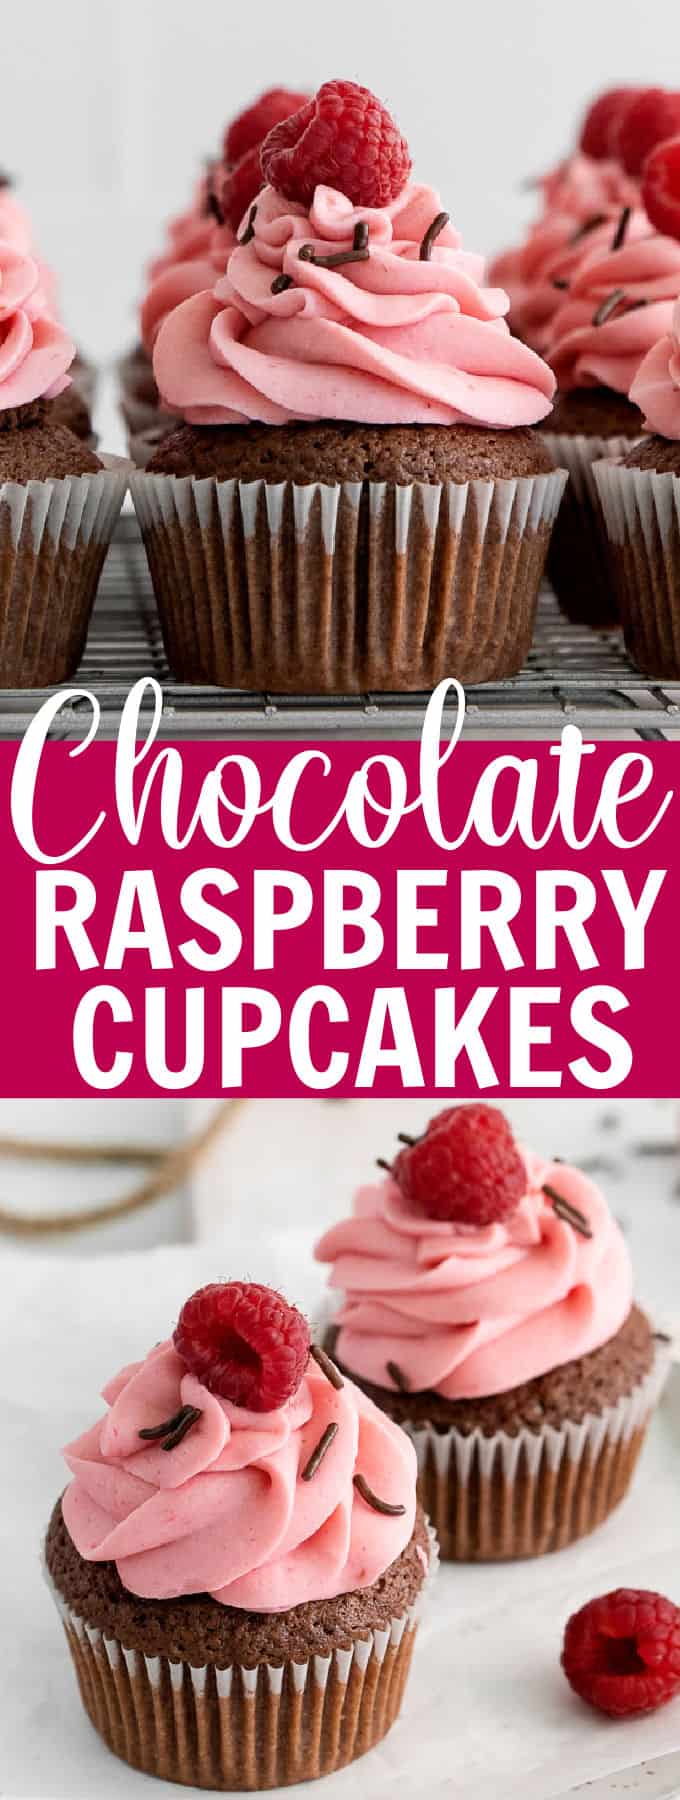 chocolate raspberry cupcakes on a wire rack.